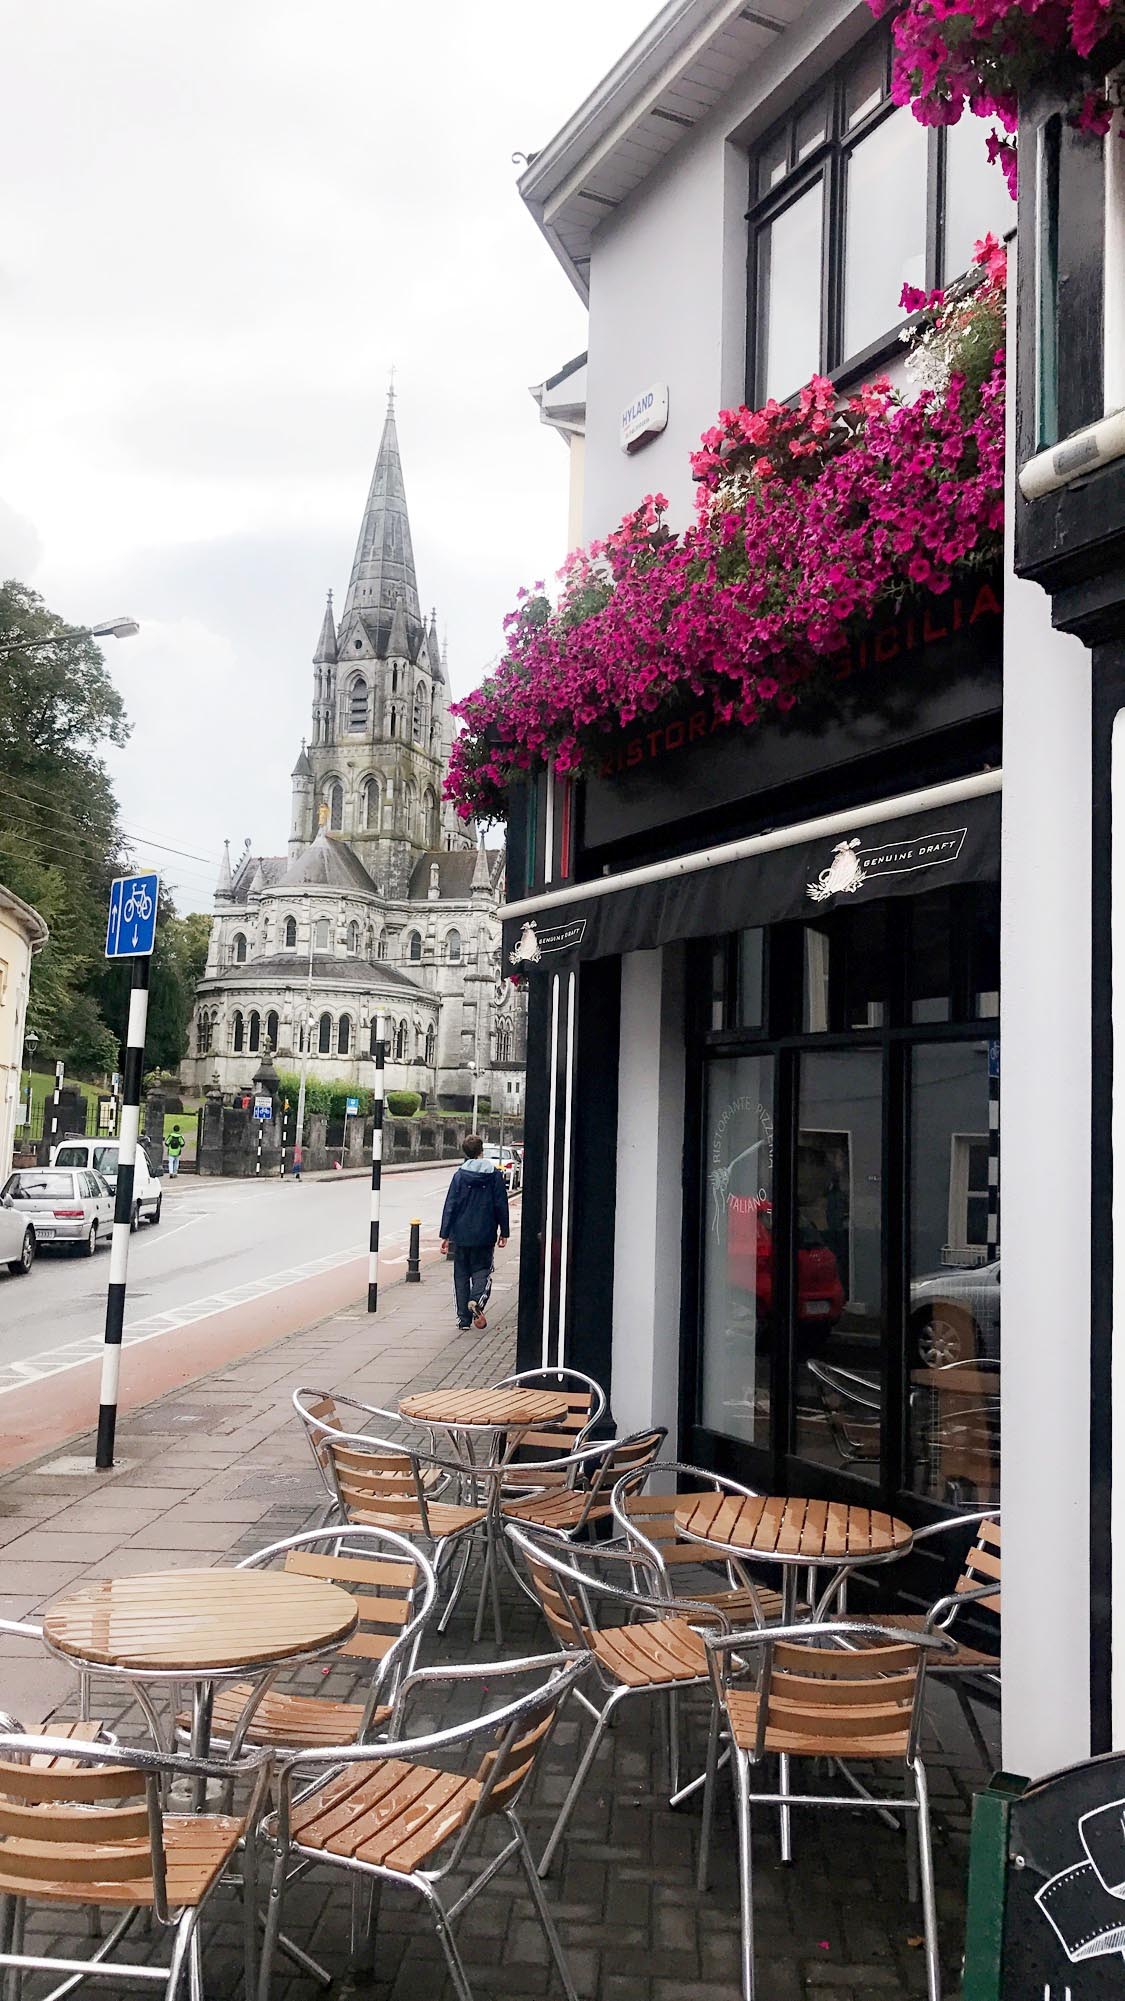 A view of St. Finn Barre Cathedral from a café in Cork, Ireland.